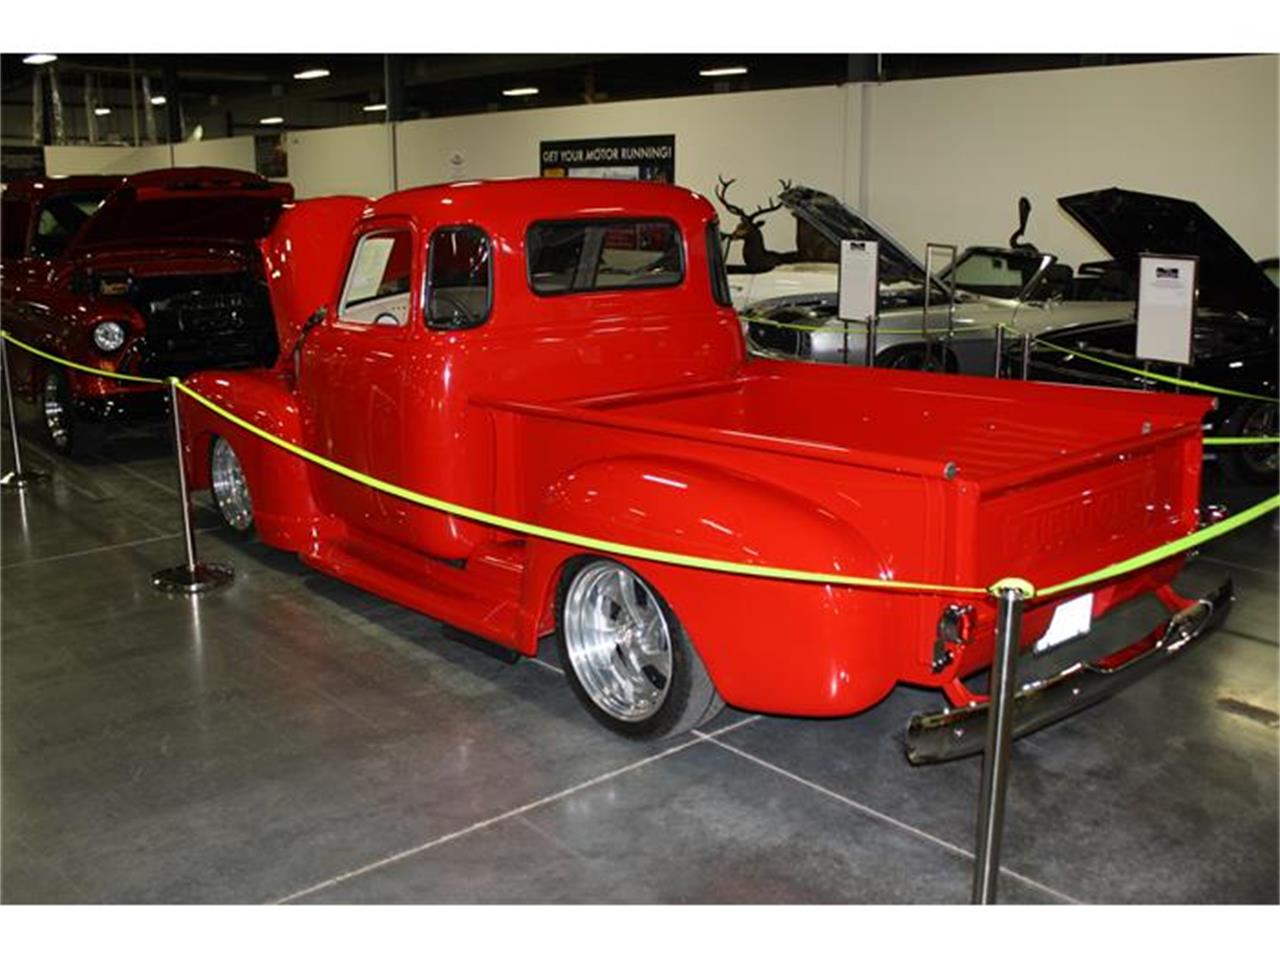 1948 Chevrolet 5-Window Pickup for Sale | ClassicCars.com ...